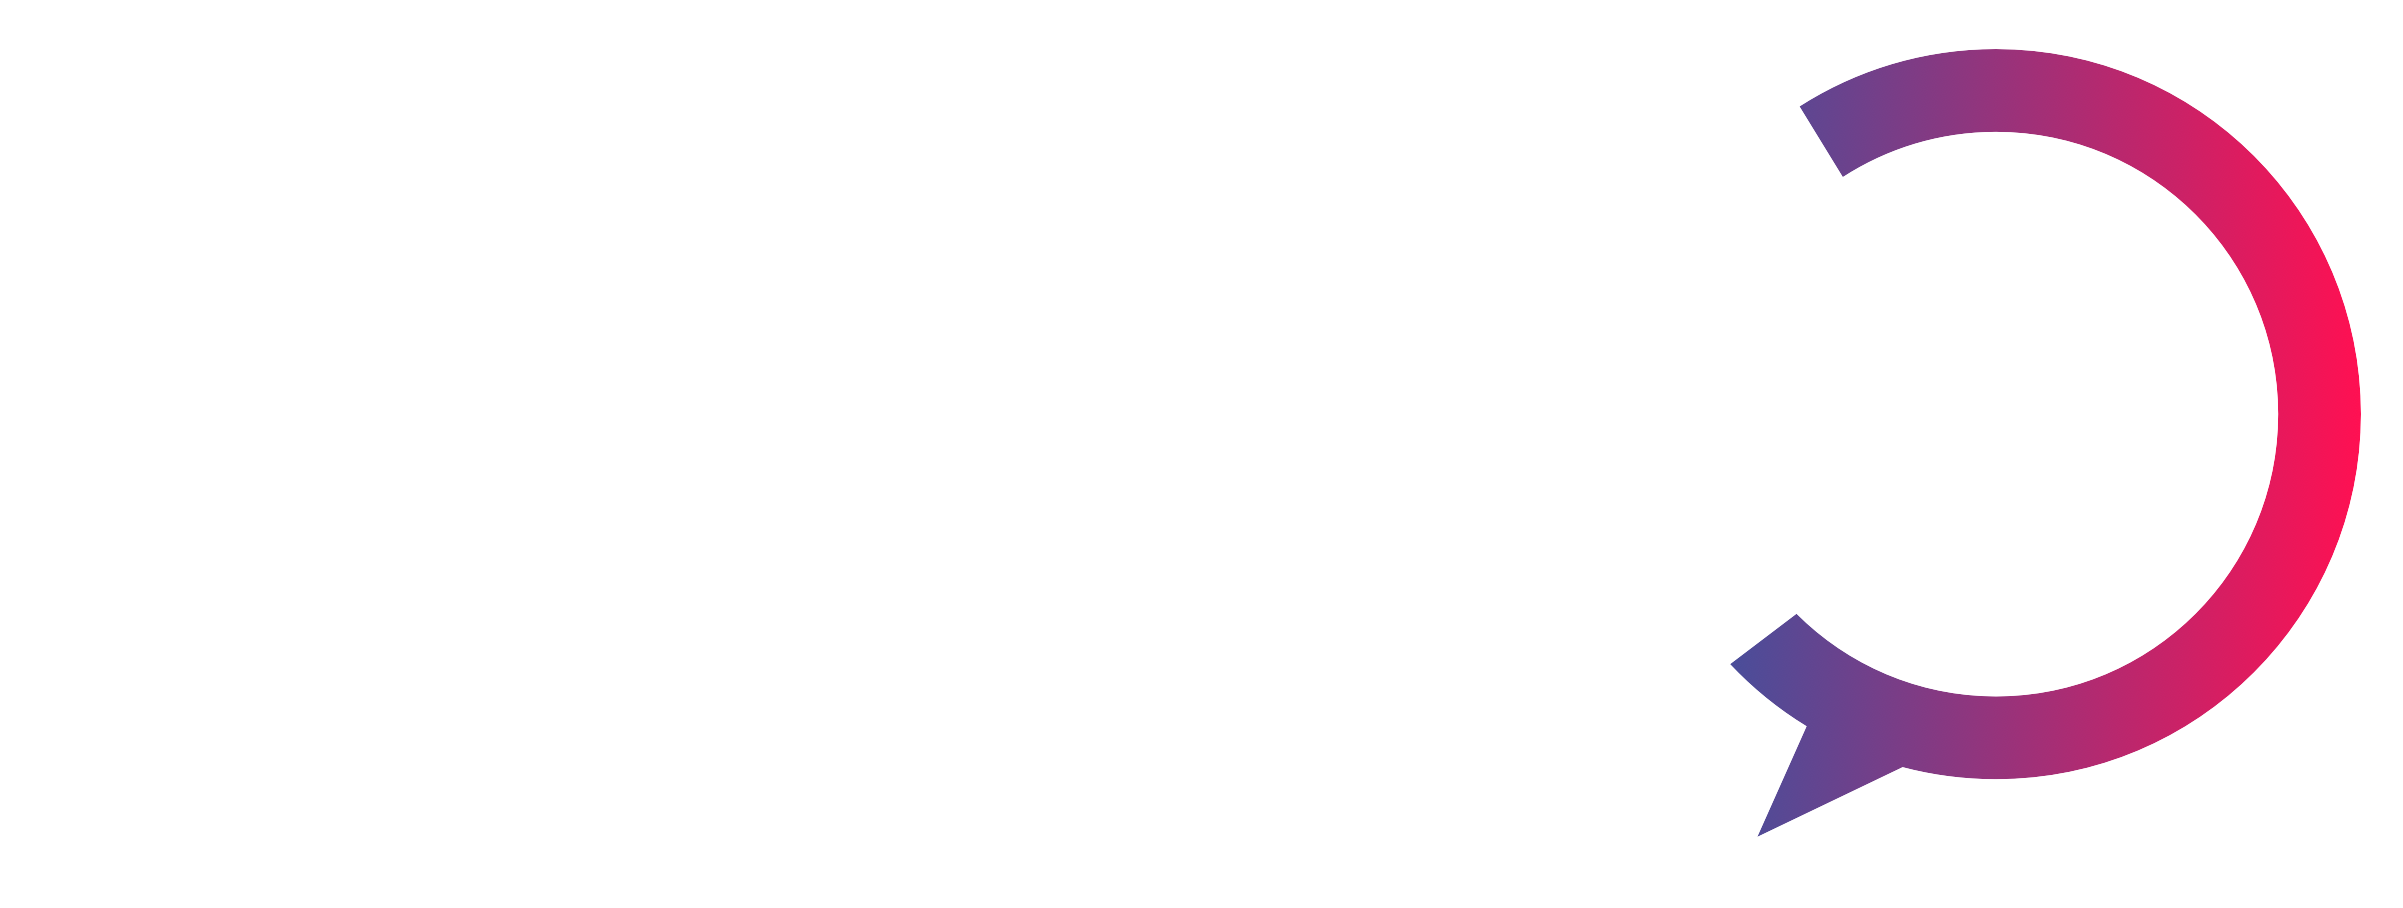 products&people